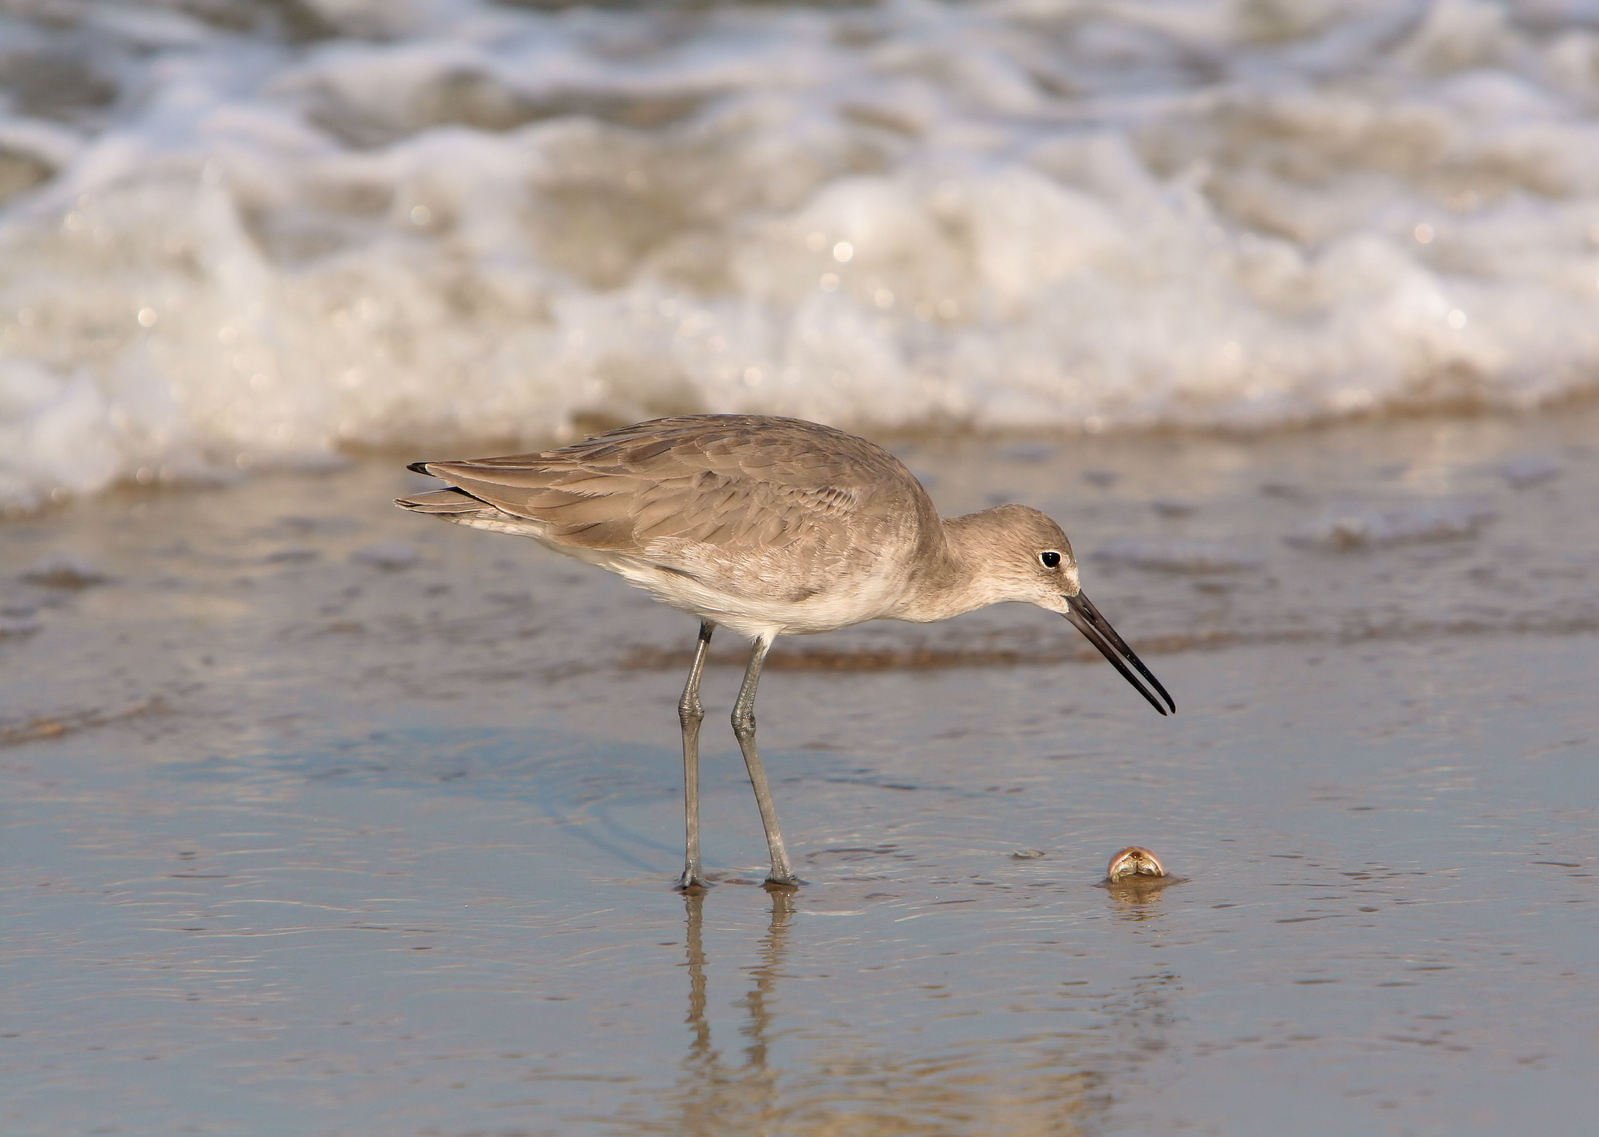 a bird walking on the sand near the waves